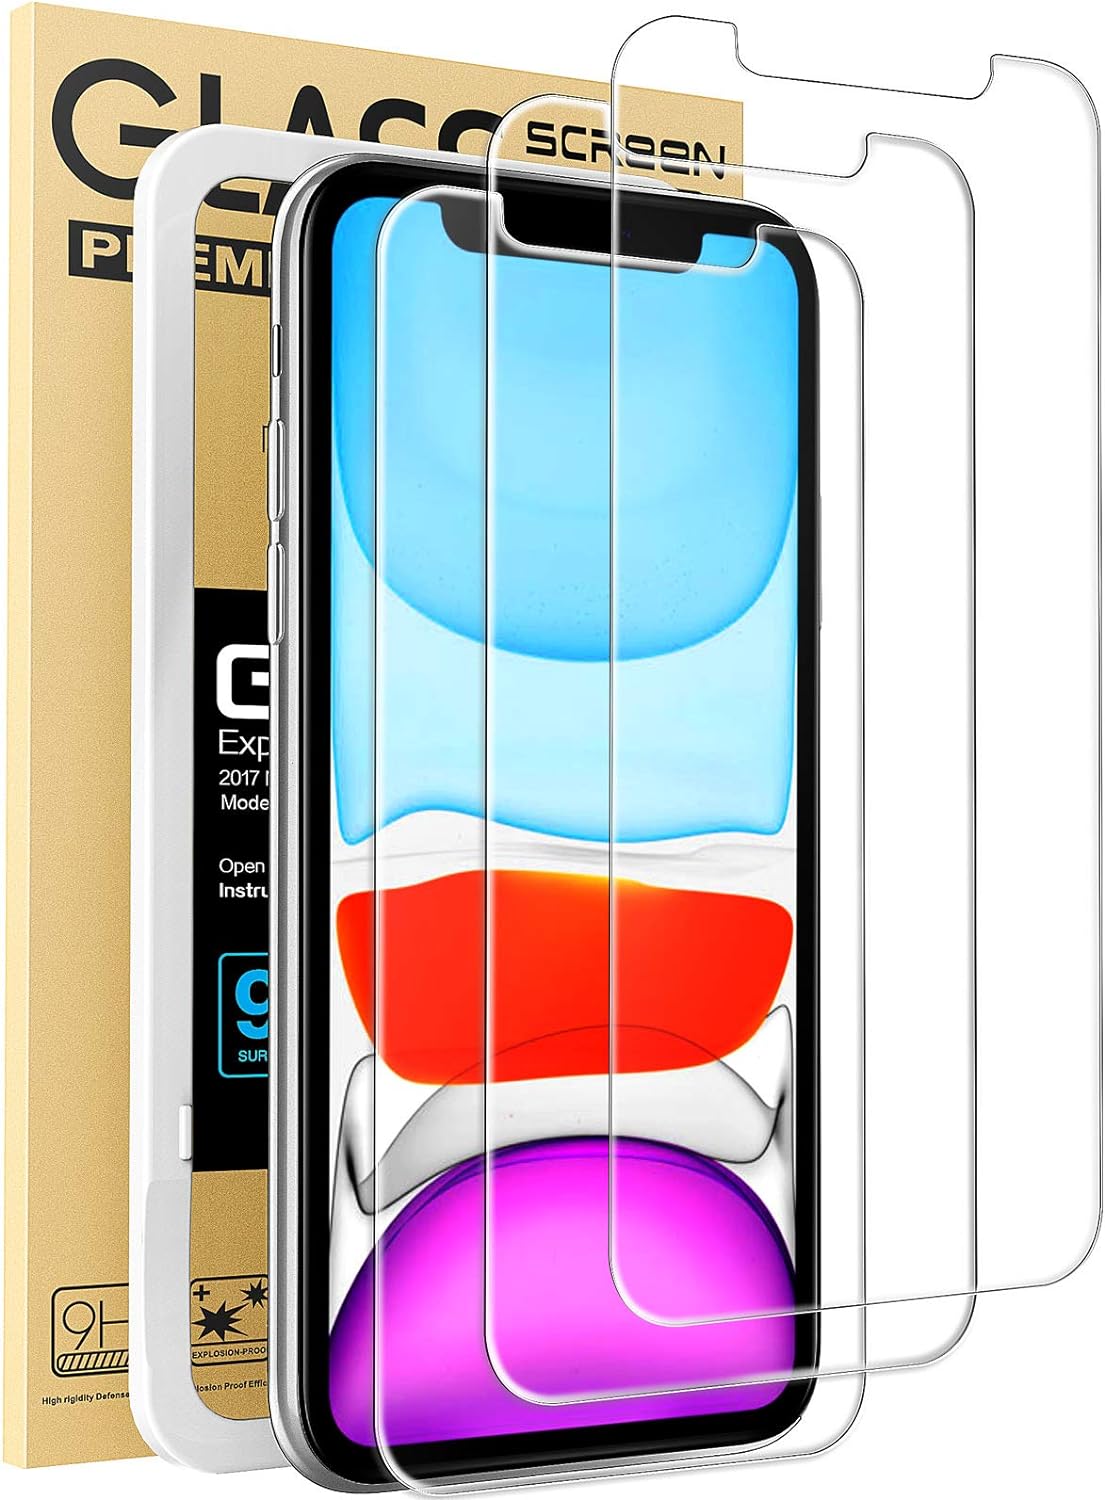 I recently purchased the Mkeke Compatible with iPhone 11 Screen Protector for my iPhone XR and I am extremely satisfied with this product. As someone who is prone to dropping their phone, I was in need of a reliable and effective screen protector. The Mkeke tempered glass film definitely delivers on both of those fronts.The installation process was a breeze - the included tools made it simple to align the protector perfectly on my phone' screen. The tempered glass is incredibly strong and durab